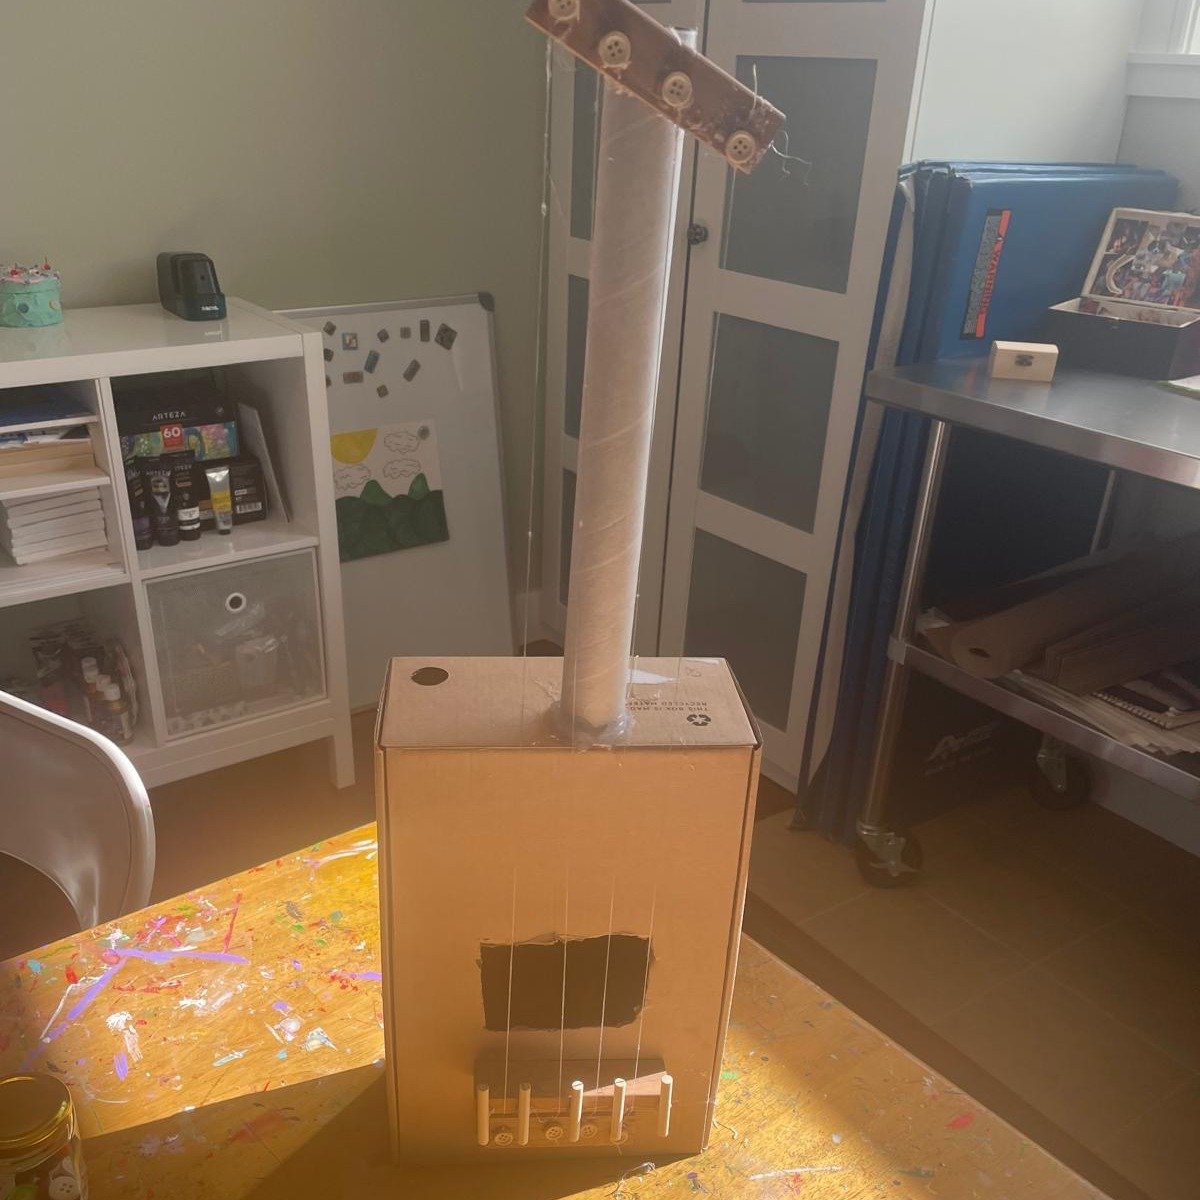 This #FunFriday, we're rocking out with some art therapy vibes 🤘✌️🎸🎤🥁 Check out this masterpiece from one of Kelley's recent sessions--a guitar-inspired creation that's hitting all the right notes! #arttherapy #expression #mentalhealth #creativea